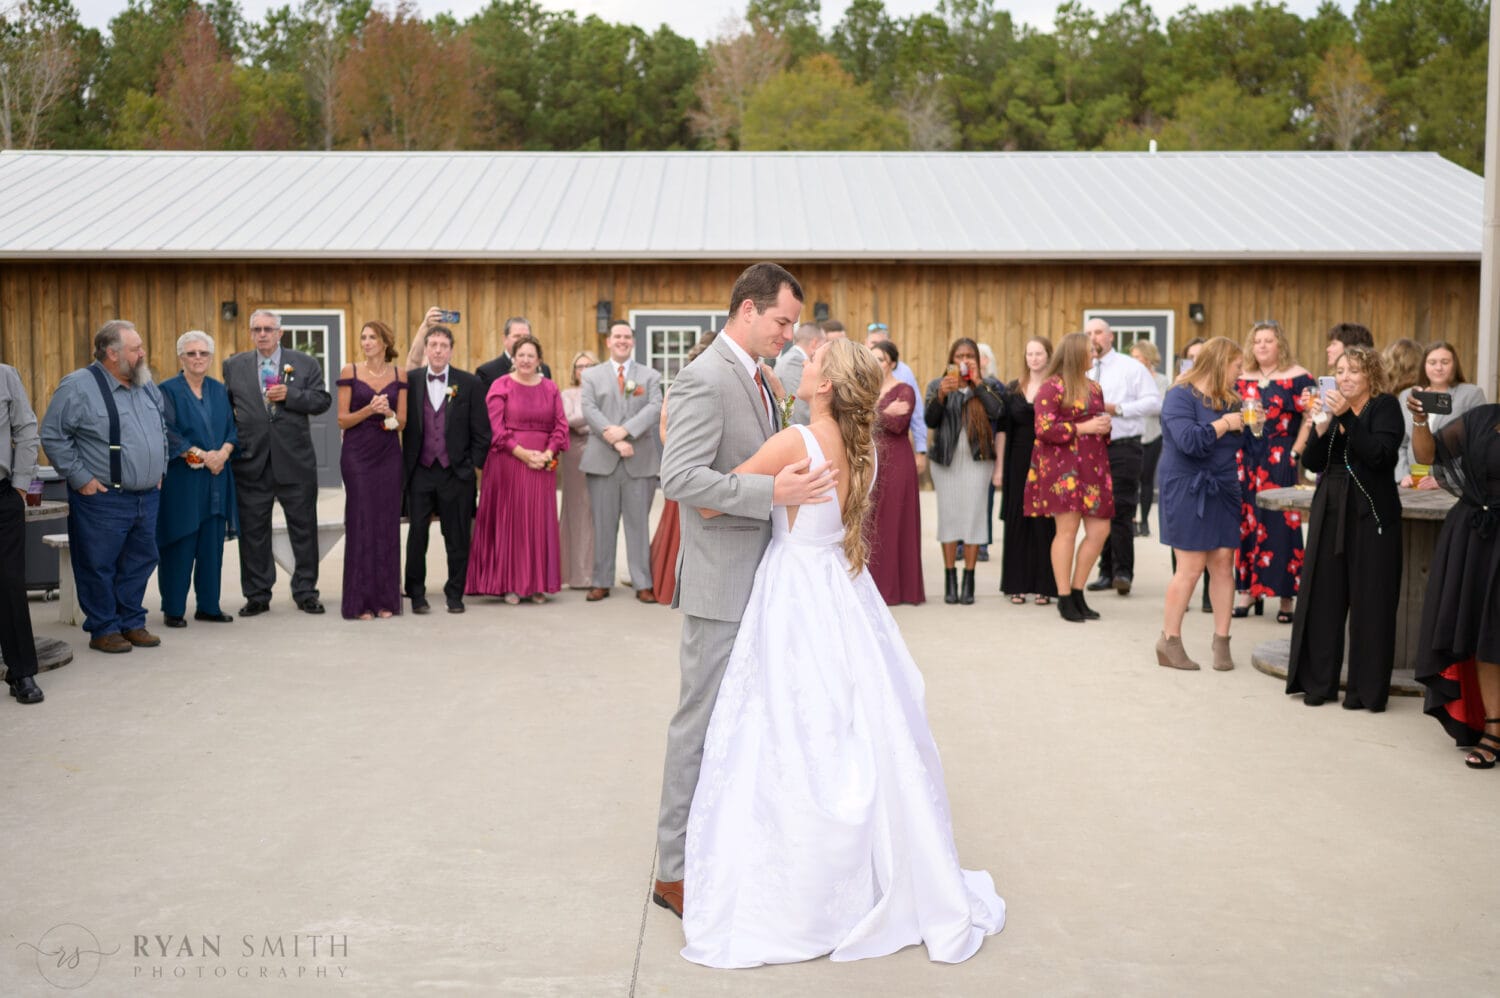 First dance with the bride and groom and family standing in the background - The Blessed Barn